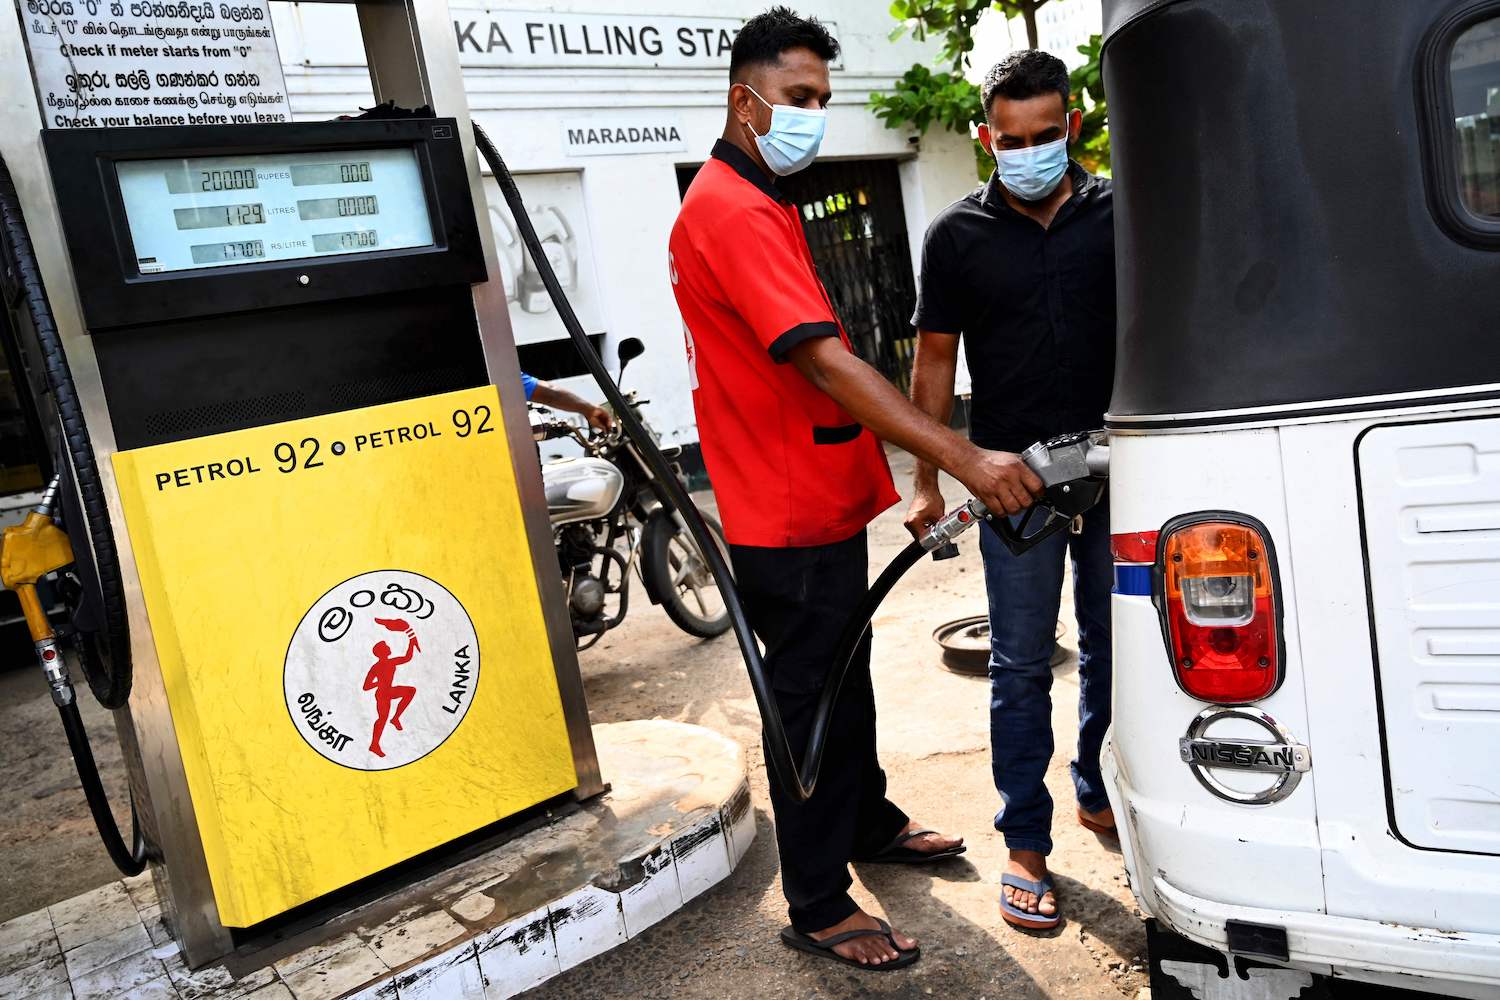 A worker fills the tank of an auto rickshaw at a petrol station in Colombo on February 18, 2022. (Photo by Ishara S. KODIKARA / AFP)